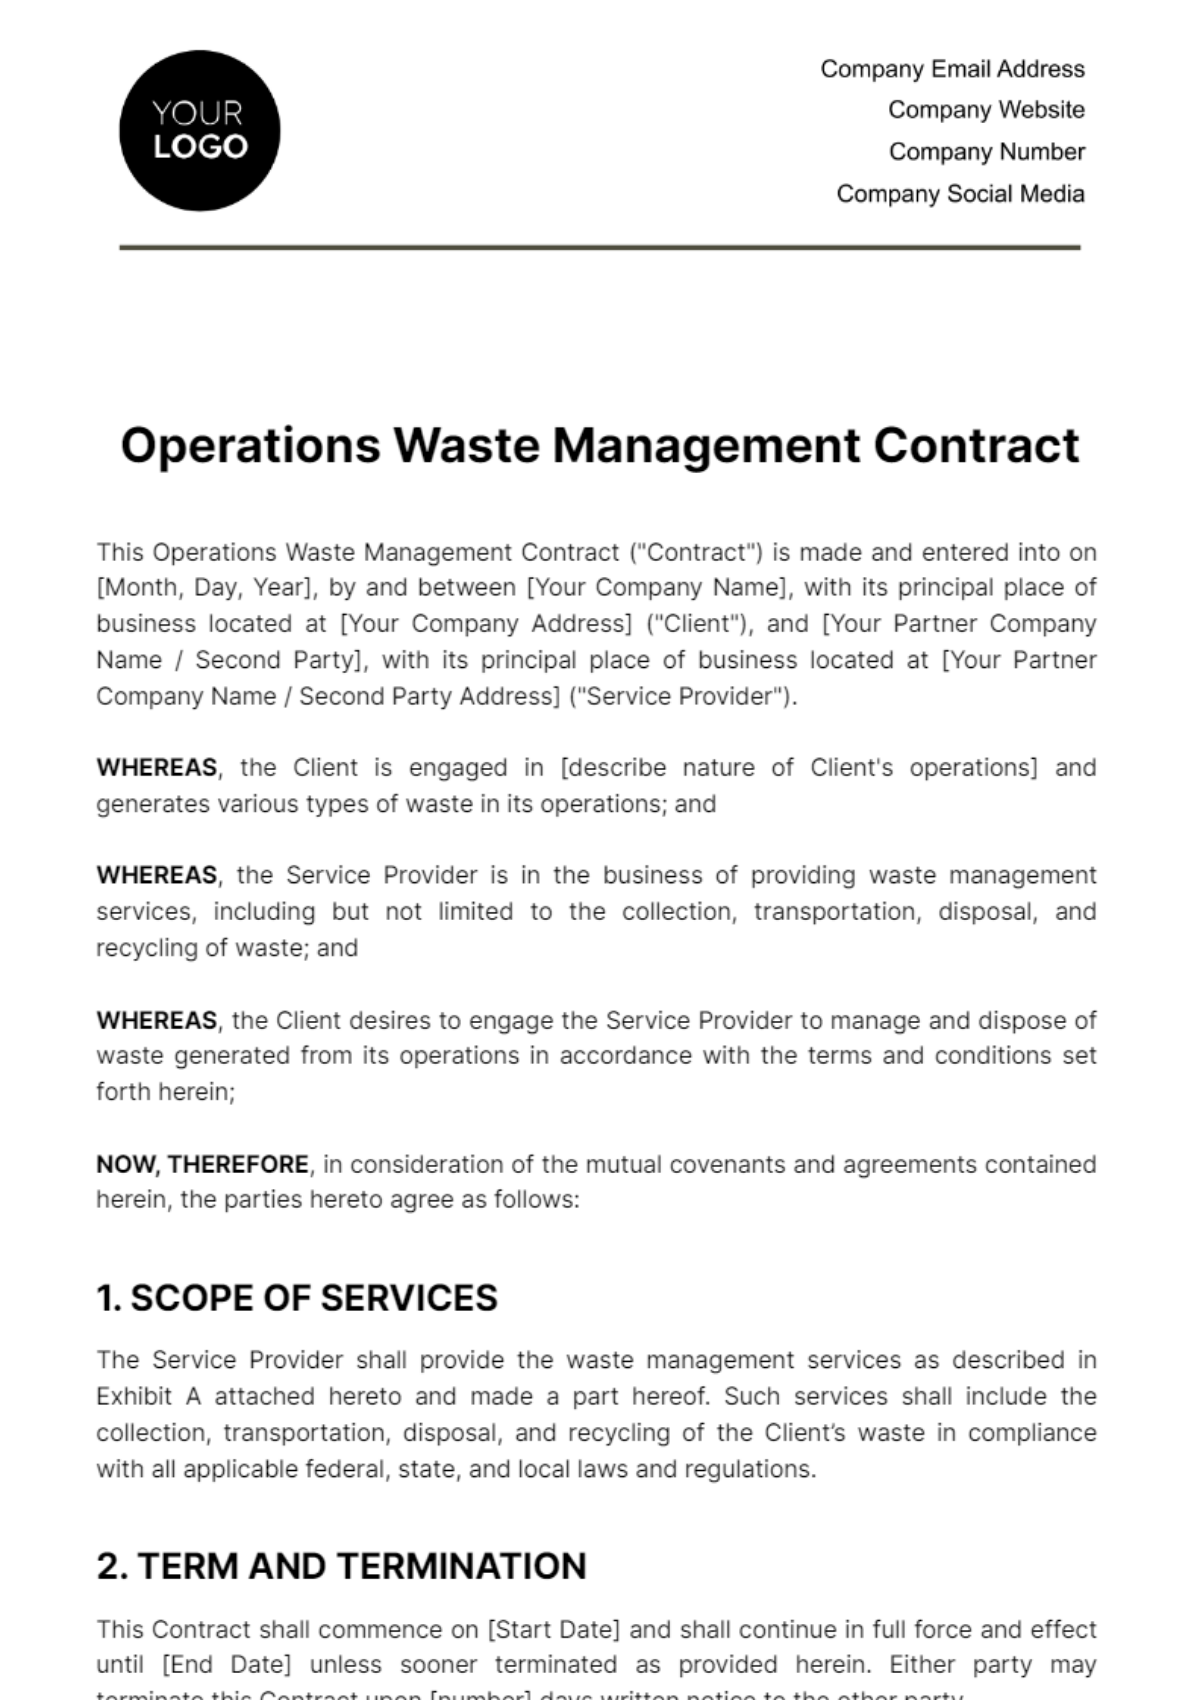 Operations Waste Management Contract Template